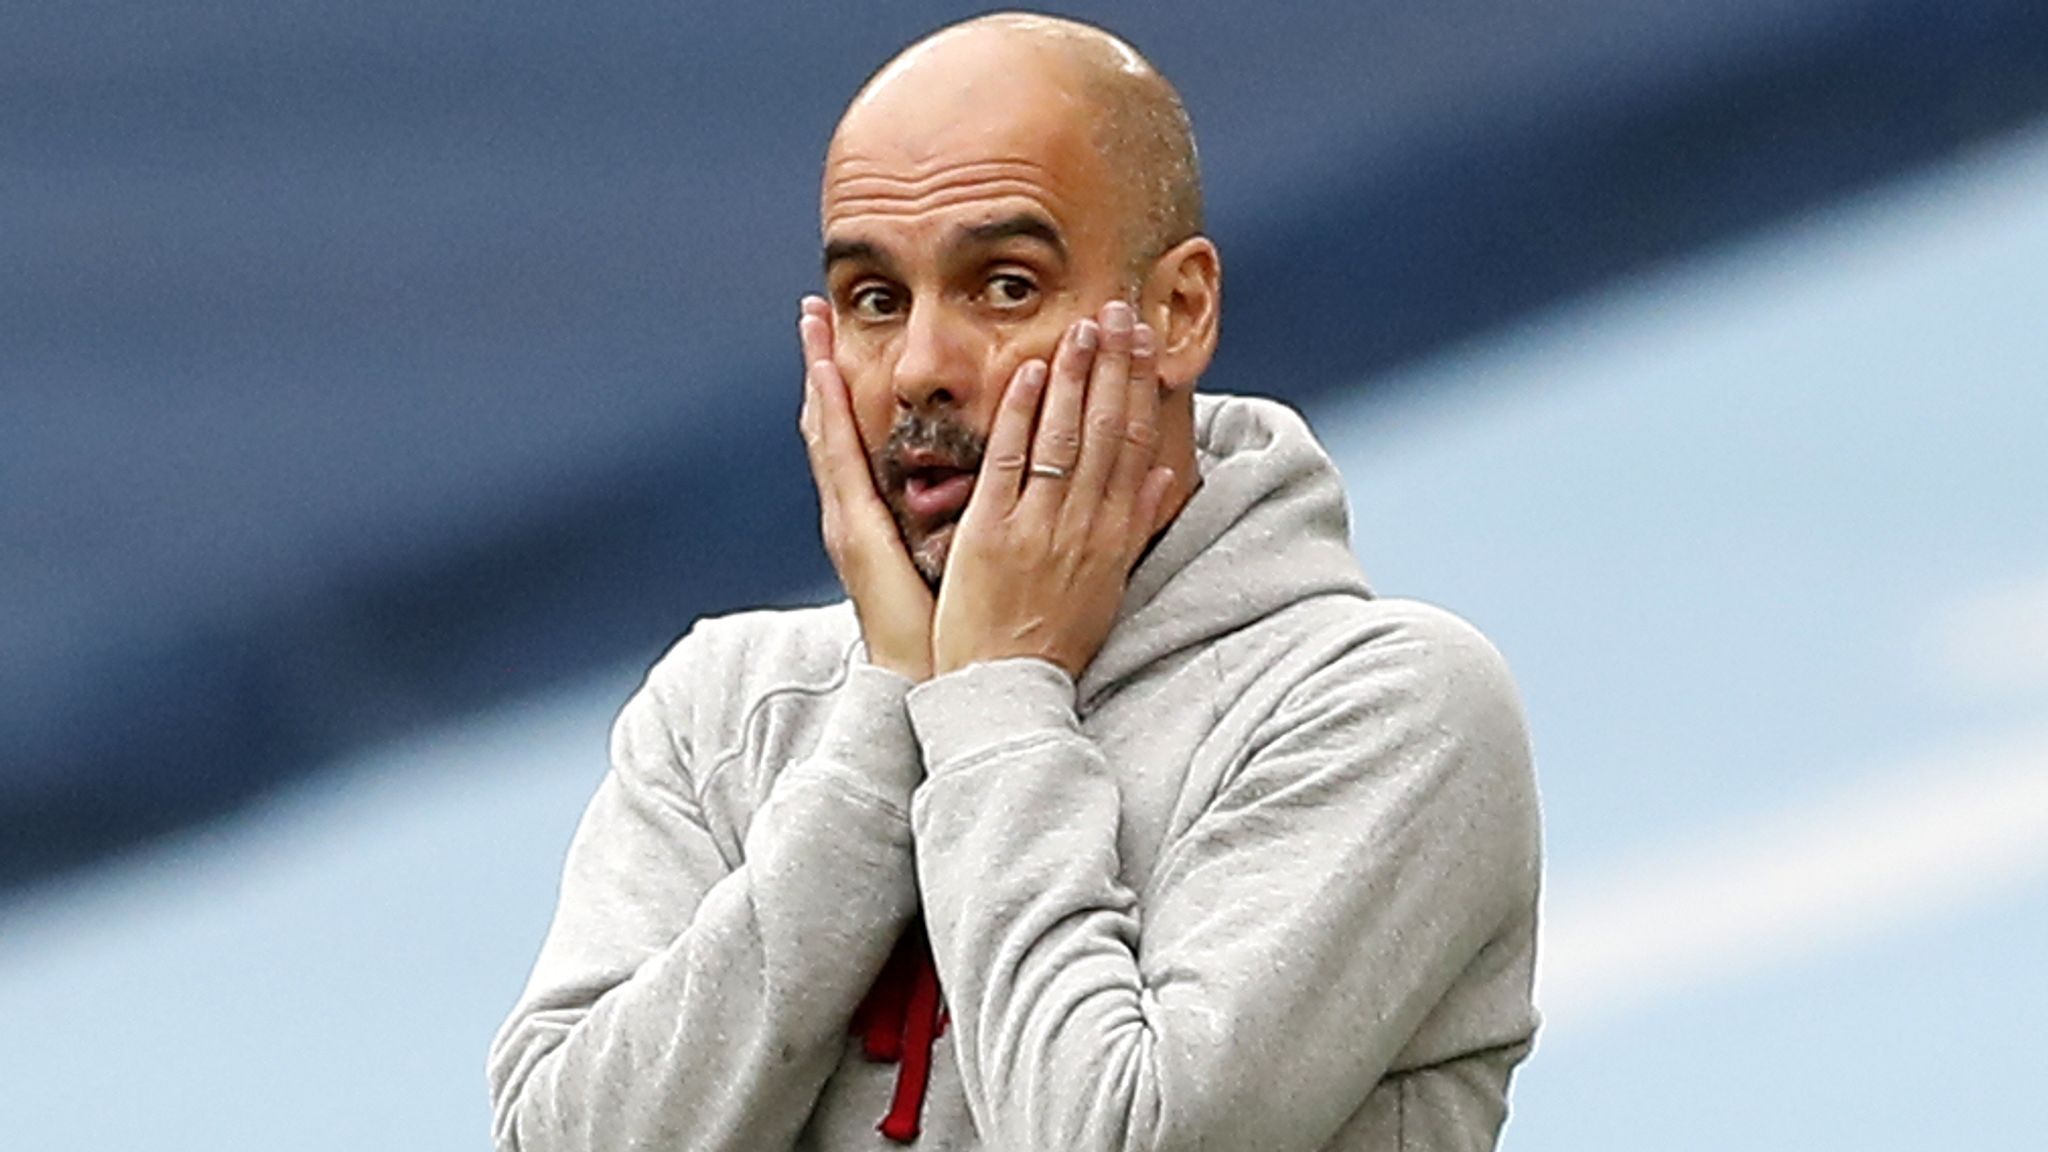 Pep Guardiola: 'Stick to coaching', fans tell Man City boss after he asks more supporters to attend games | Football News | Sky Sports